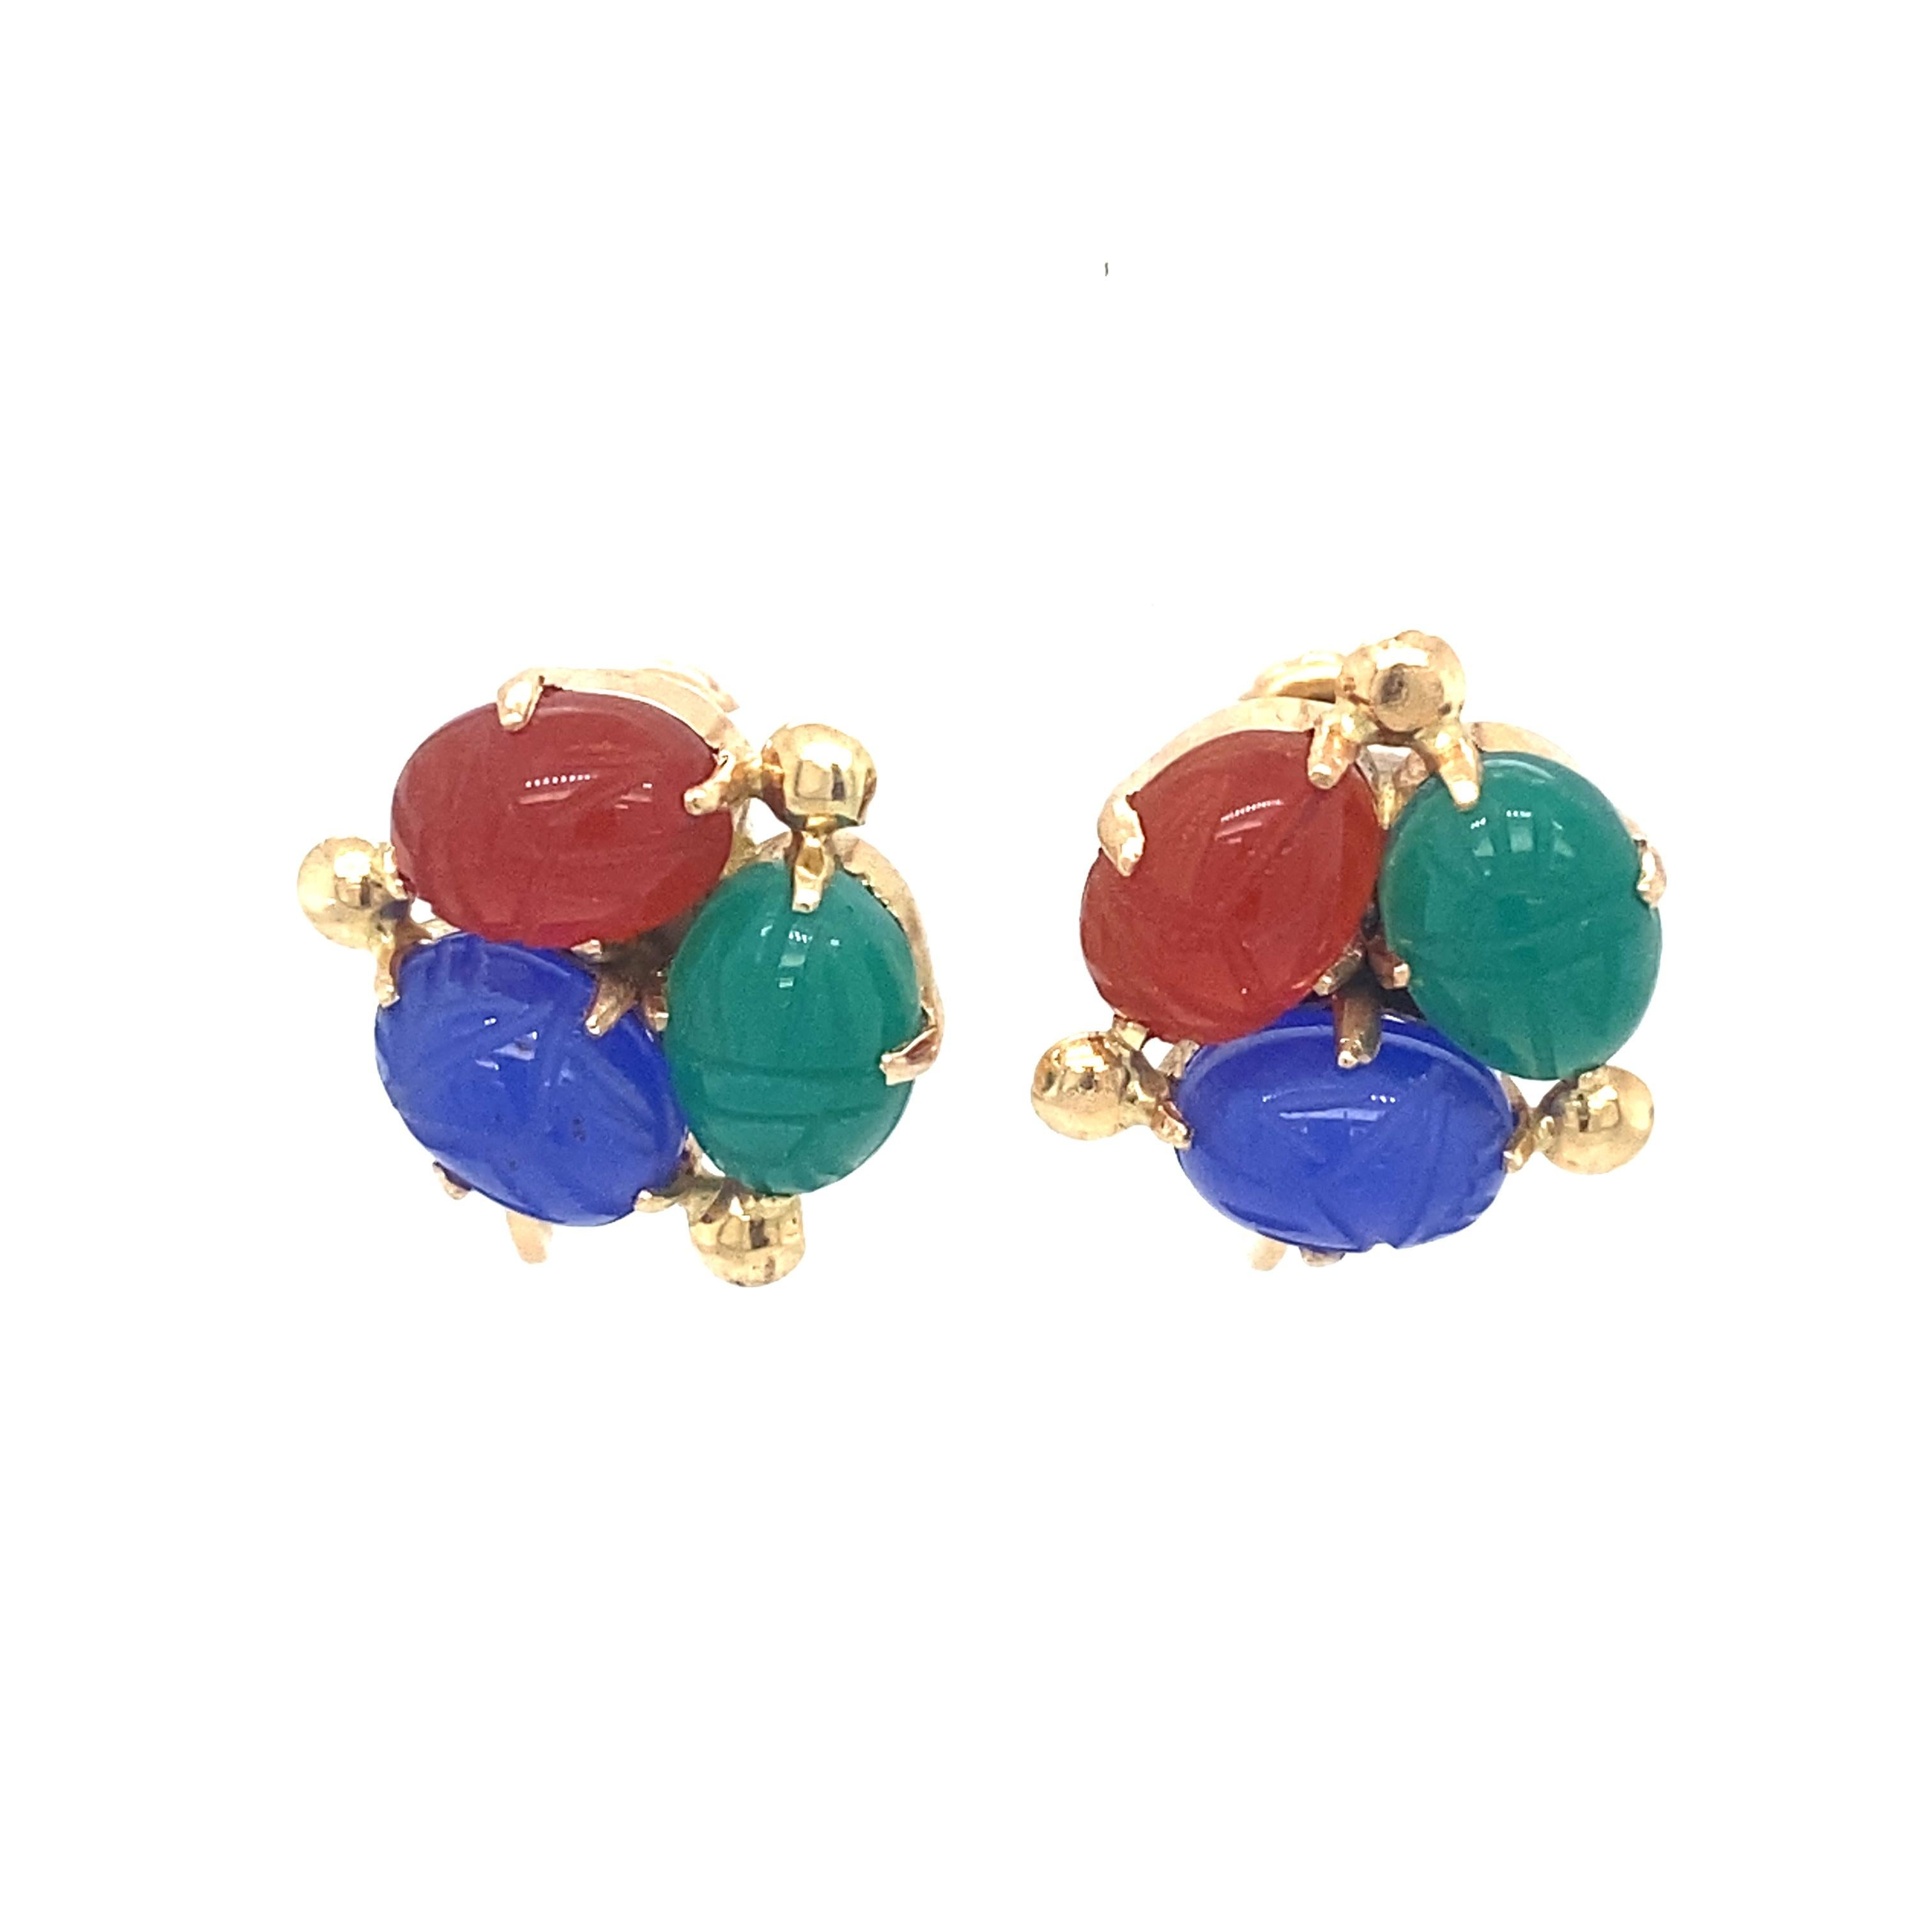 Item Details: These earrings have screw backs and feature larnet, lapis lazuli and chalcedony gemstones carved into scarabs.

Circa: 1950s
Metal Type: 14 Karat Yellow Gold
Weight: 5.3 grams